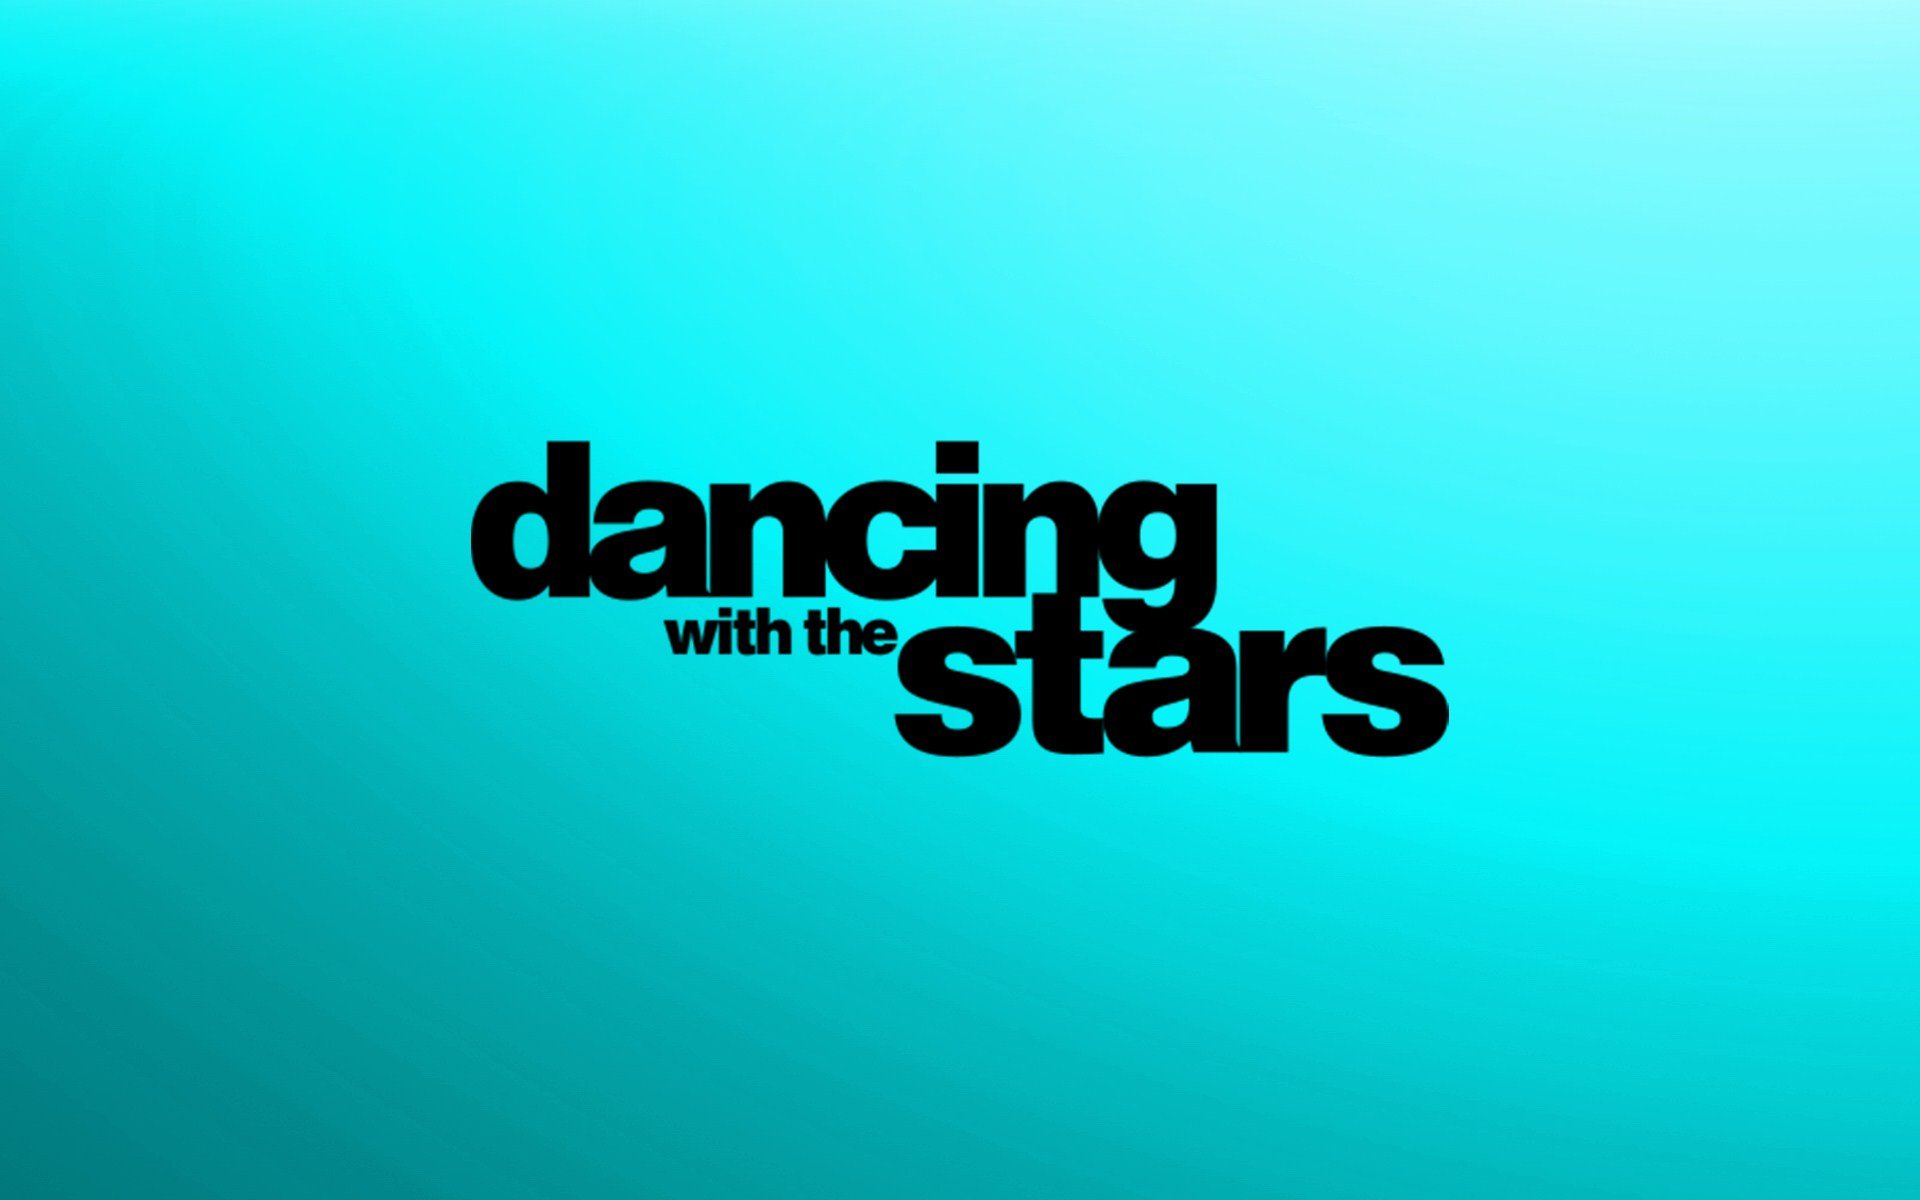 dancing with the stars, Family, Gameshow, Dance, Music, Stars, Dancing, Series, Competition,  53 Wallpaper